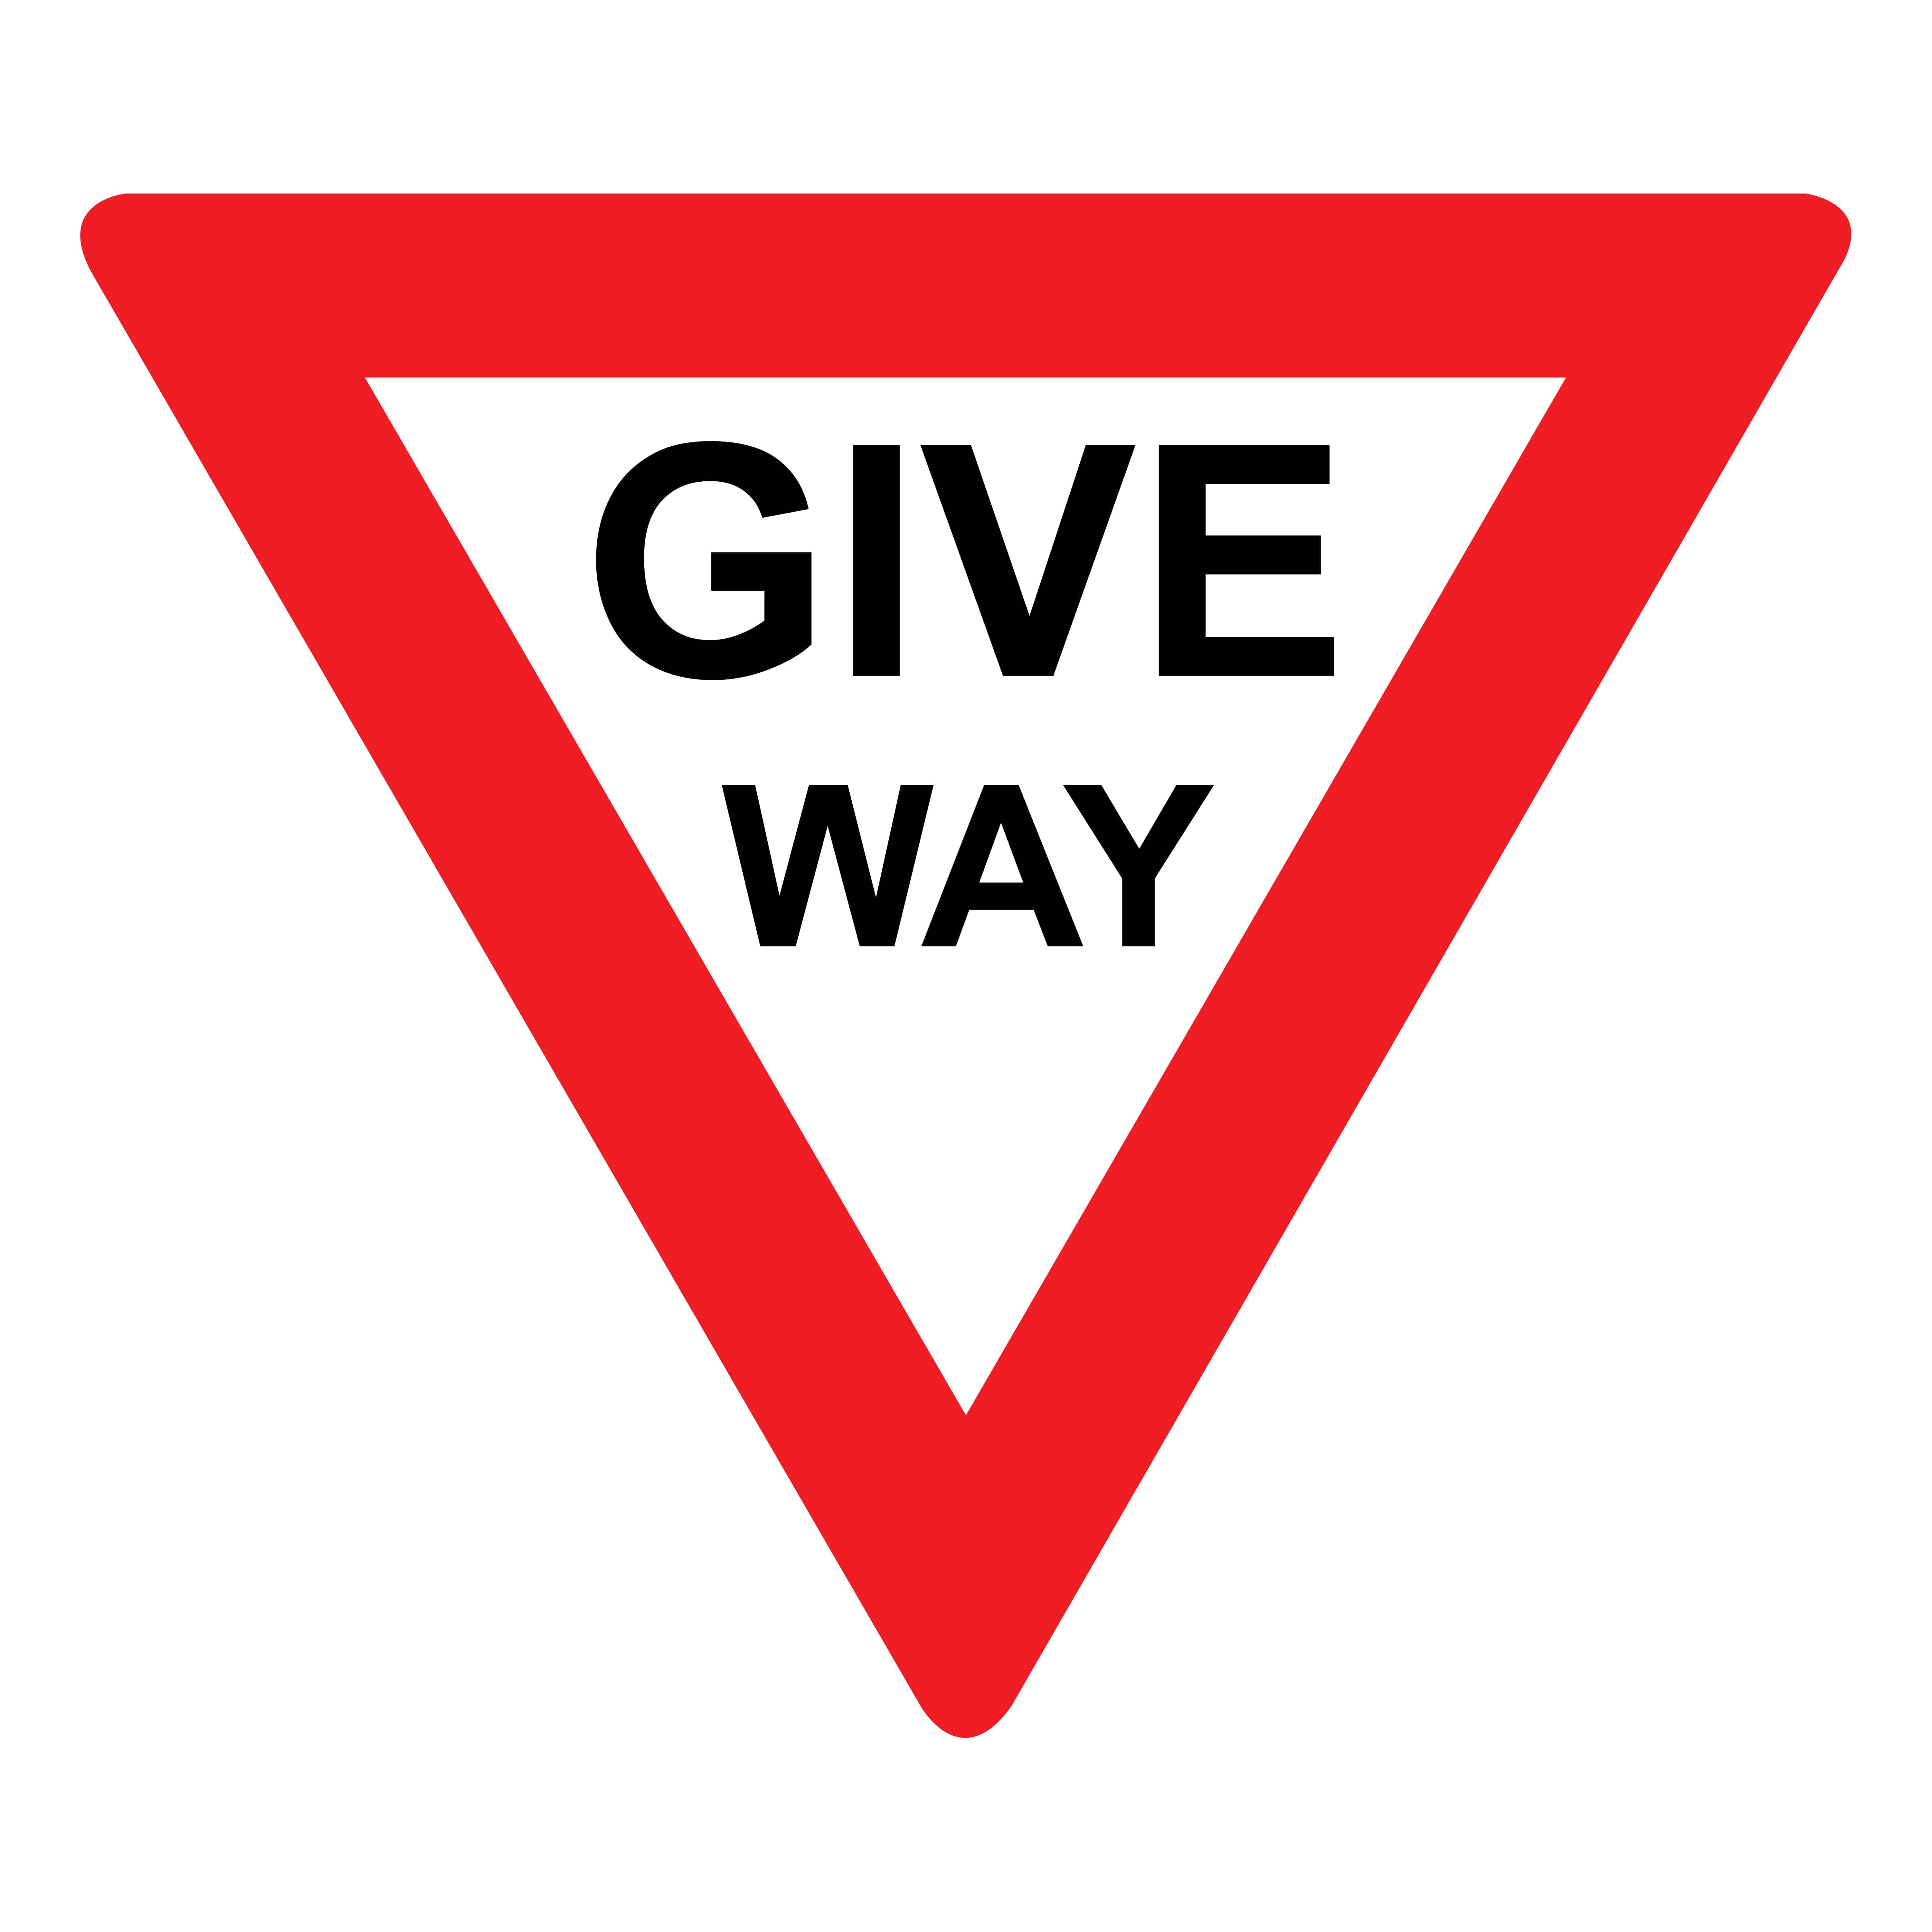 Red Triangular Automotive Logo - UK Road Signs: 5 Vital Things to Learn for your Theory Test